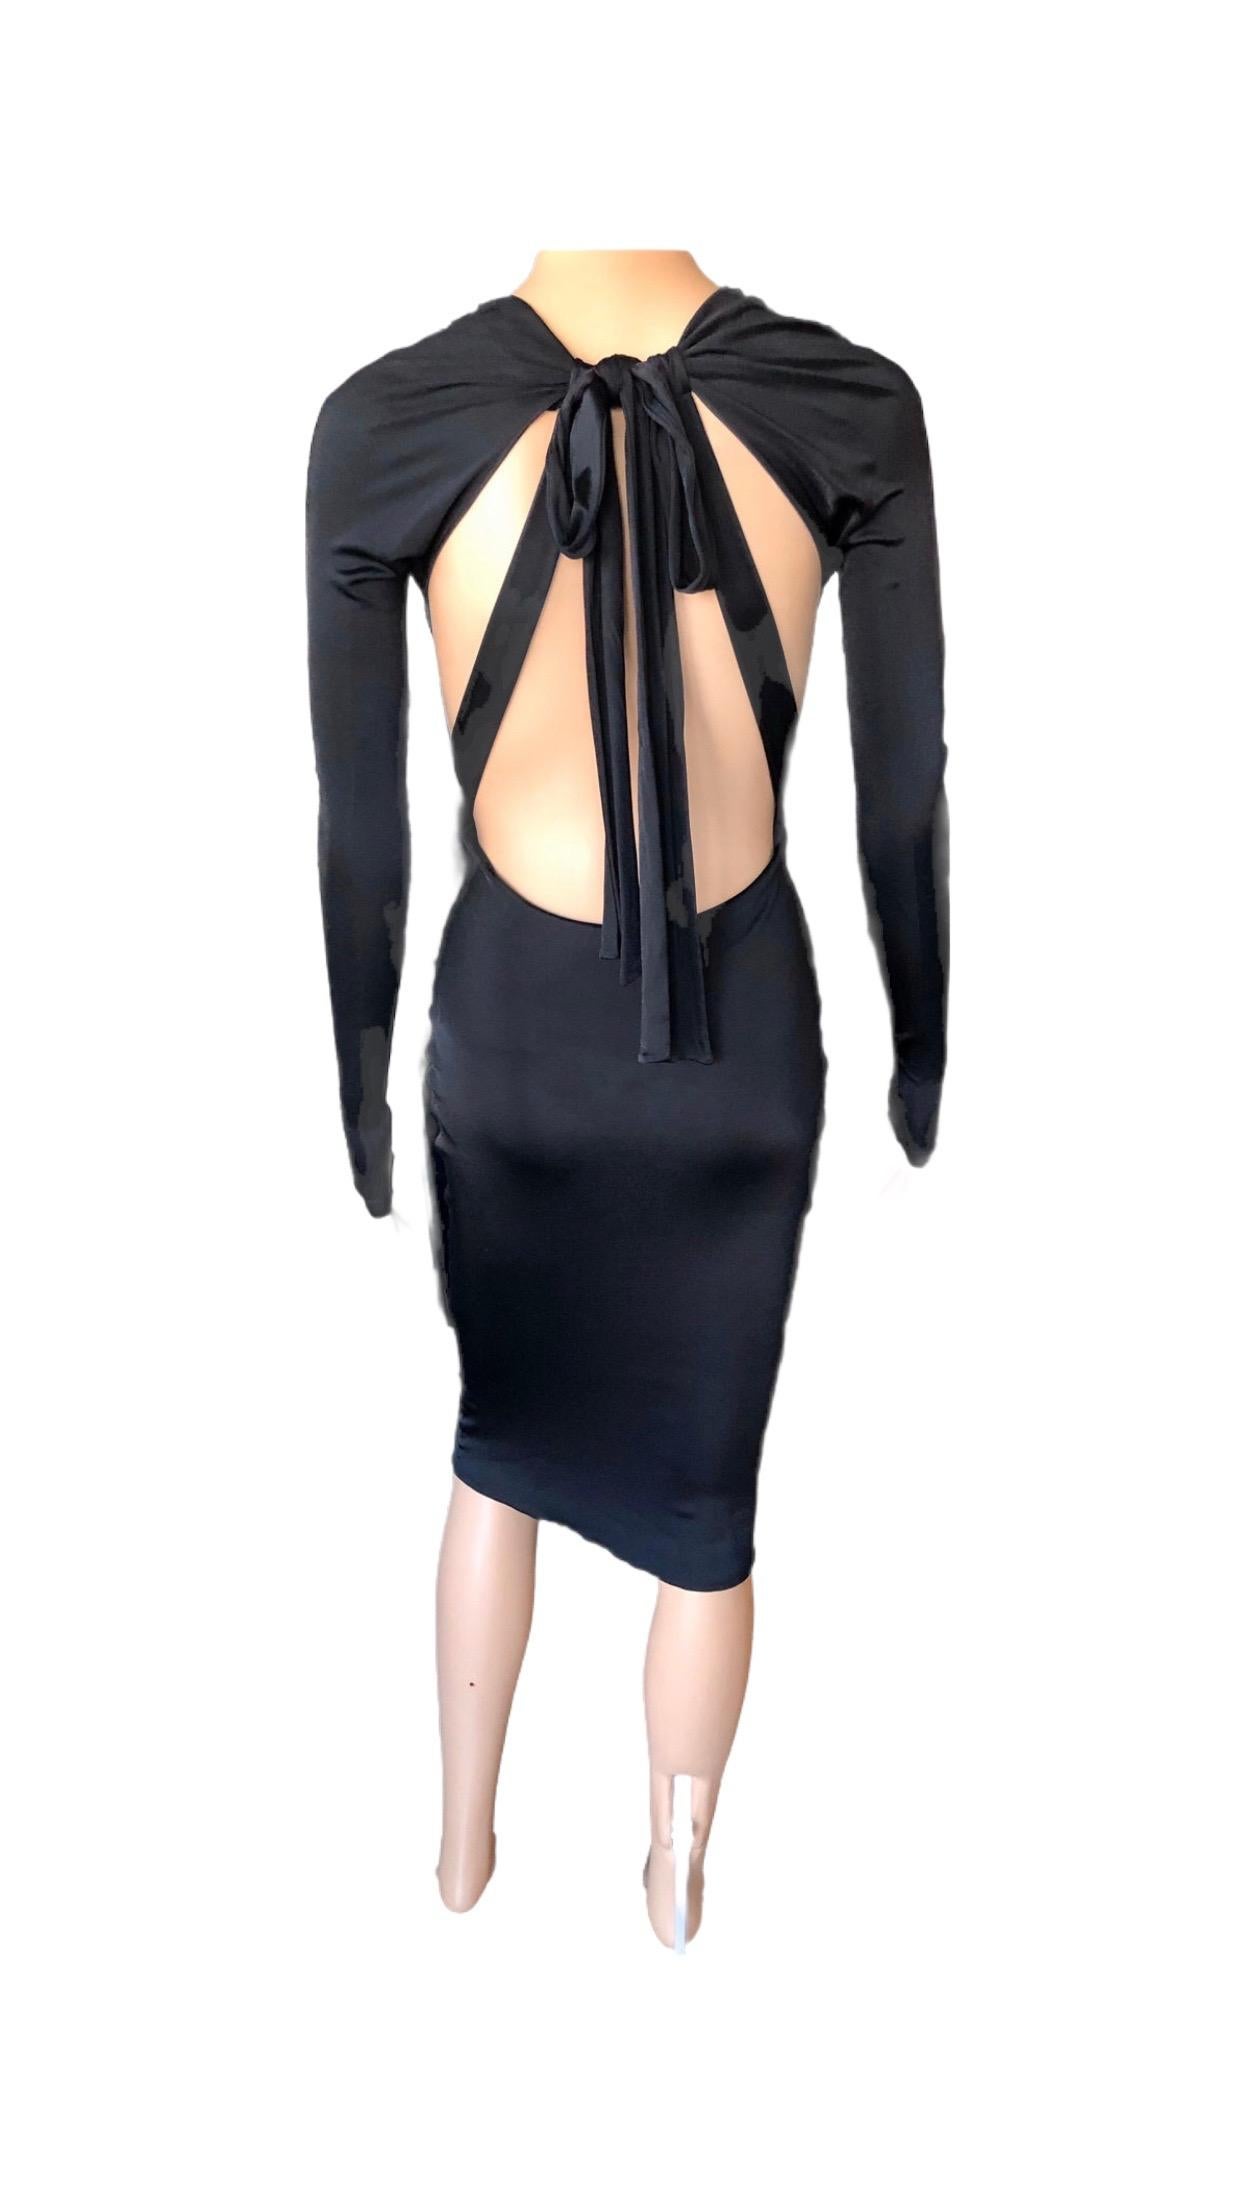 Gucci S/S 2005 Tom Ford Plunging Cutout Backless Bodycon Black Dress For Sale 13